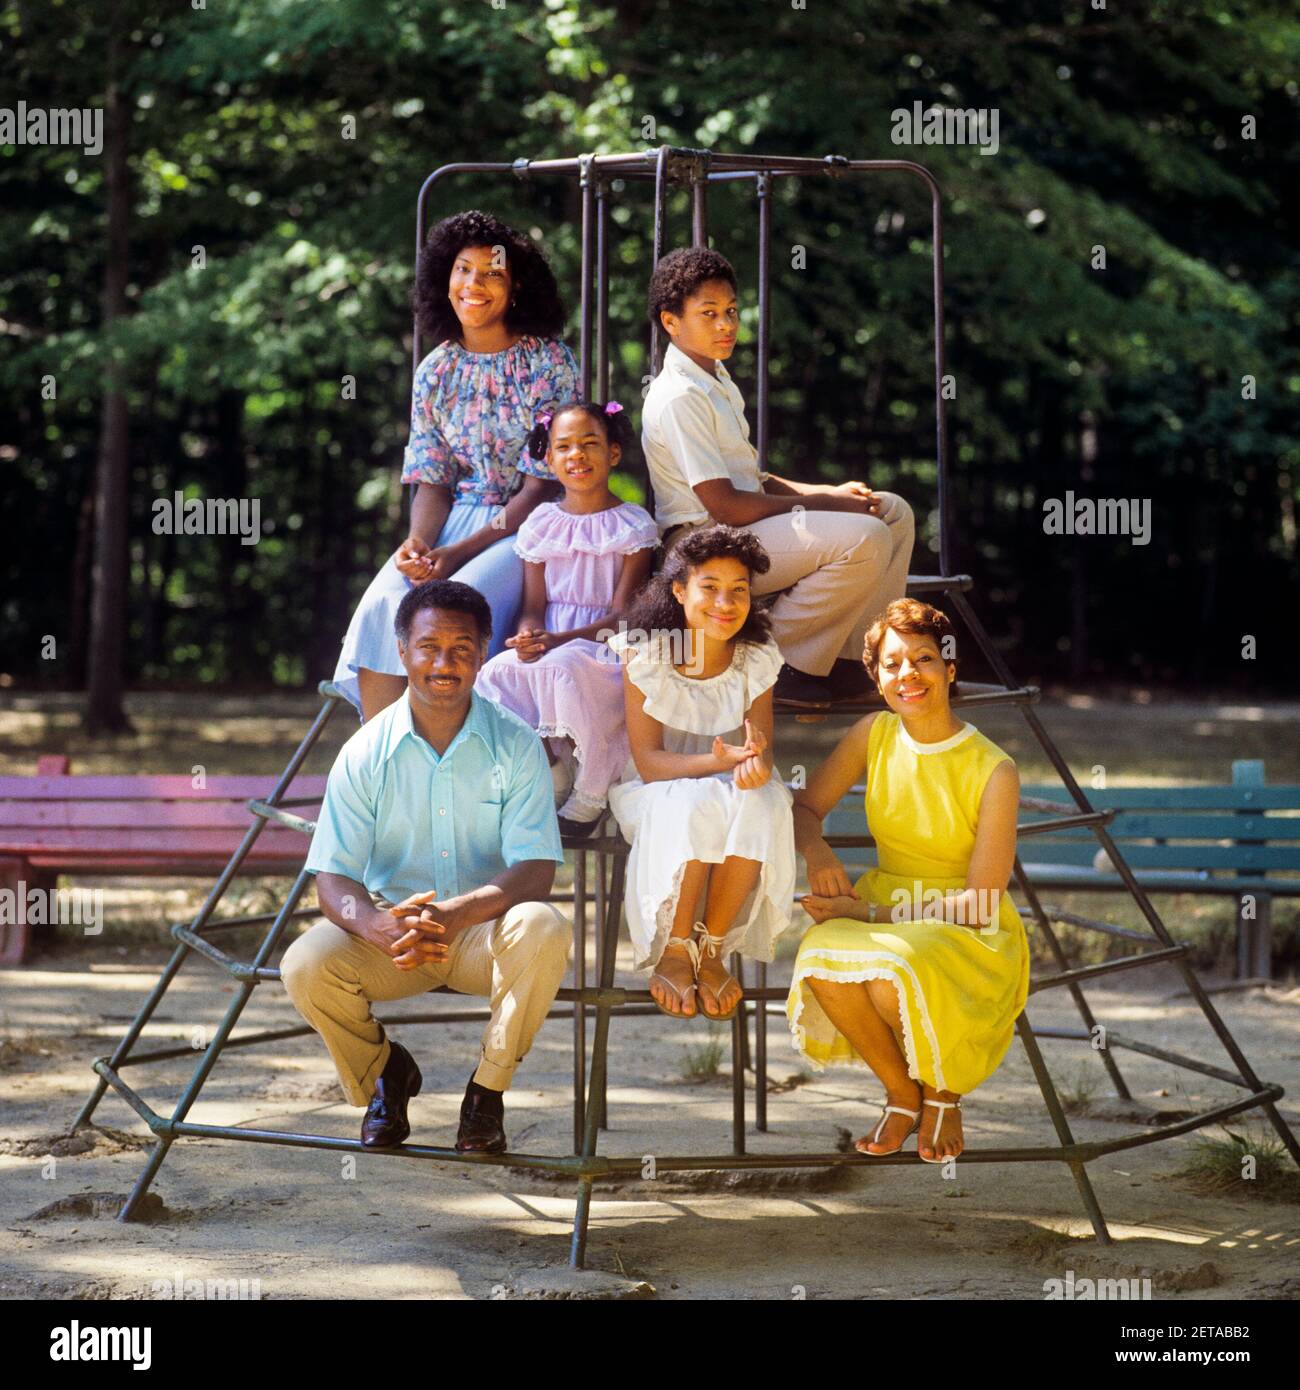 1980s FAMILY PORTRAIT AFRICAN-AMERICAN MOTHER FATHER AND 4 CHILDREN A BOY AND THREE GIRLS SITTING ON PLAYGROUND MONKEY BARS - kj9411 TEU001 HARS PLAYGROUND MOM NOSTALGIC PAIR 4 COMMUNITY COLOR MOTHERS OLD TIME NOSTALGIA OLD FASHION 1 JUVENILE SONS PLEASED FAMILIES JOY LIFESTYLE FEMALES MARRIED SPOUSE HUSBANDS HEALTHINESS 6 FRIENDSHIP LADIES DAUGHTERS PERSONS MALES TEENAGE GIRL SIX FATHERS PARTNER HAPPINESS WELLNESS CHEERFUL AFRICAN-AMERICANS AFRICAN-AMERICAN AND DADS BLACK ETHNICITY PRIDE SMILES CONNECTION JOYFUL JUVENILES MOMS PRE-TEEN PRE-TEEN BOY PRE-TEEN GIRL TOGETHERNESS WIVES MONKEY BARS Stock Photo